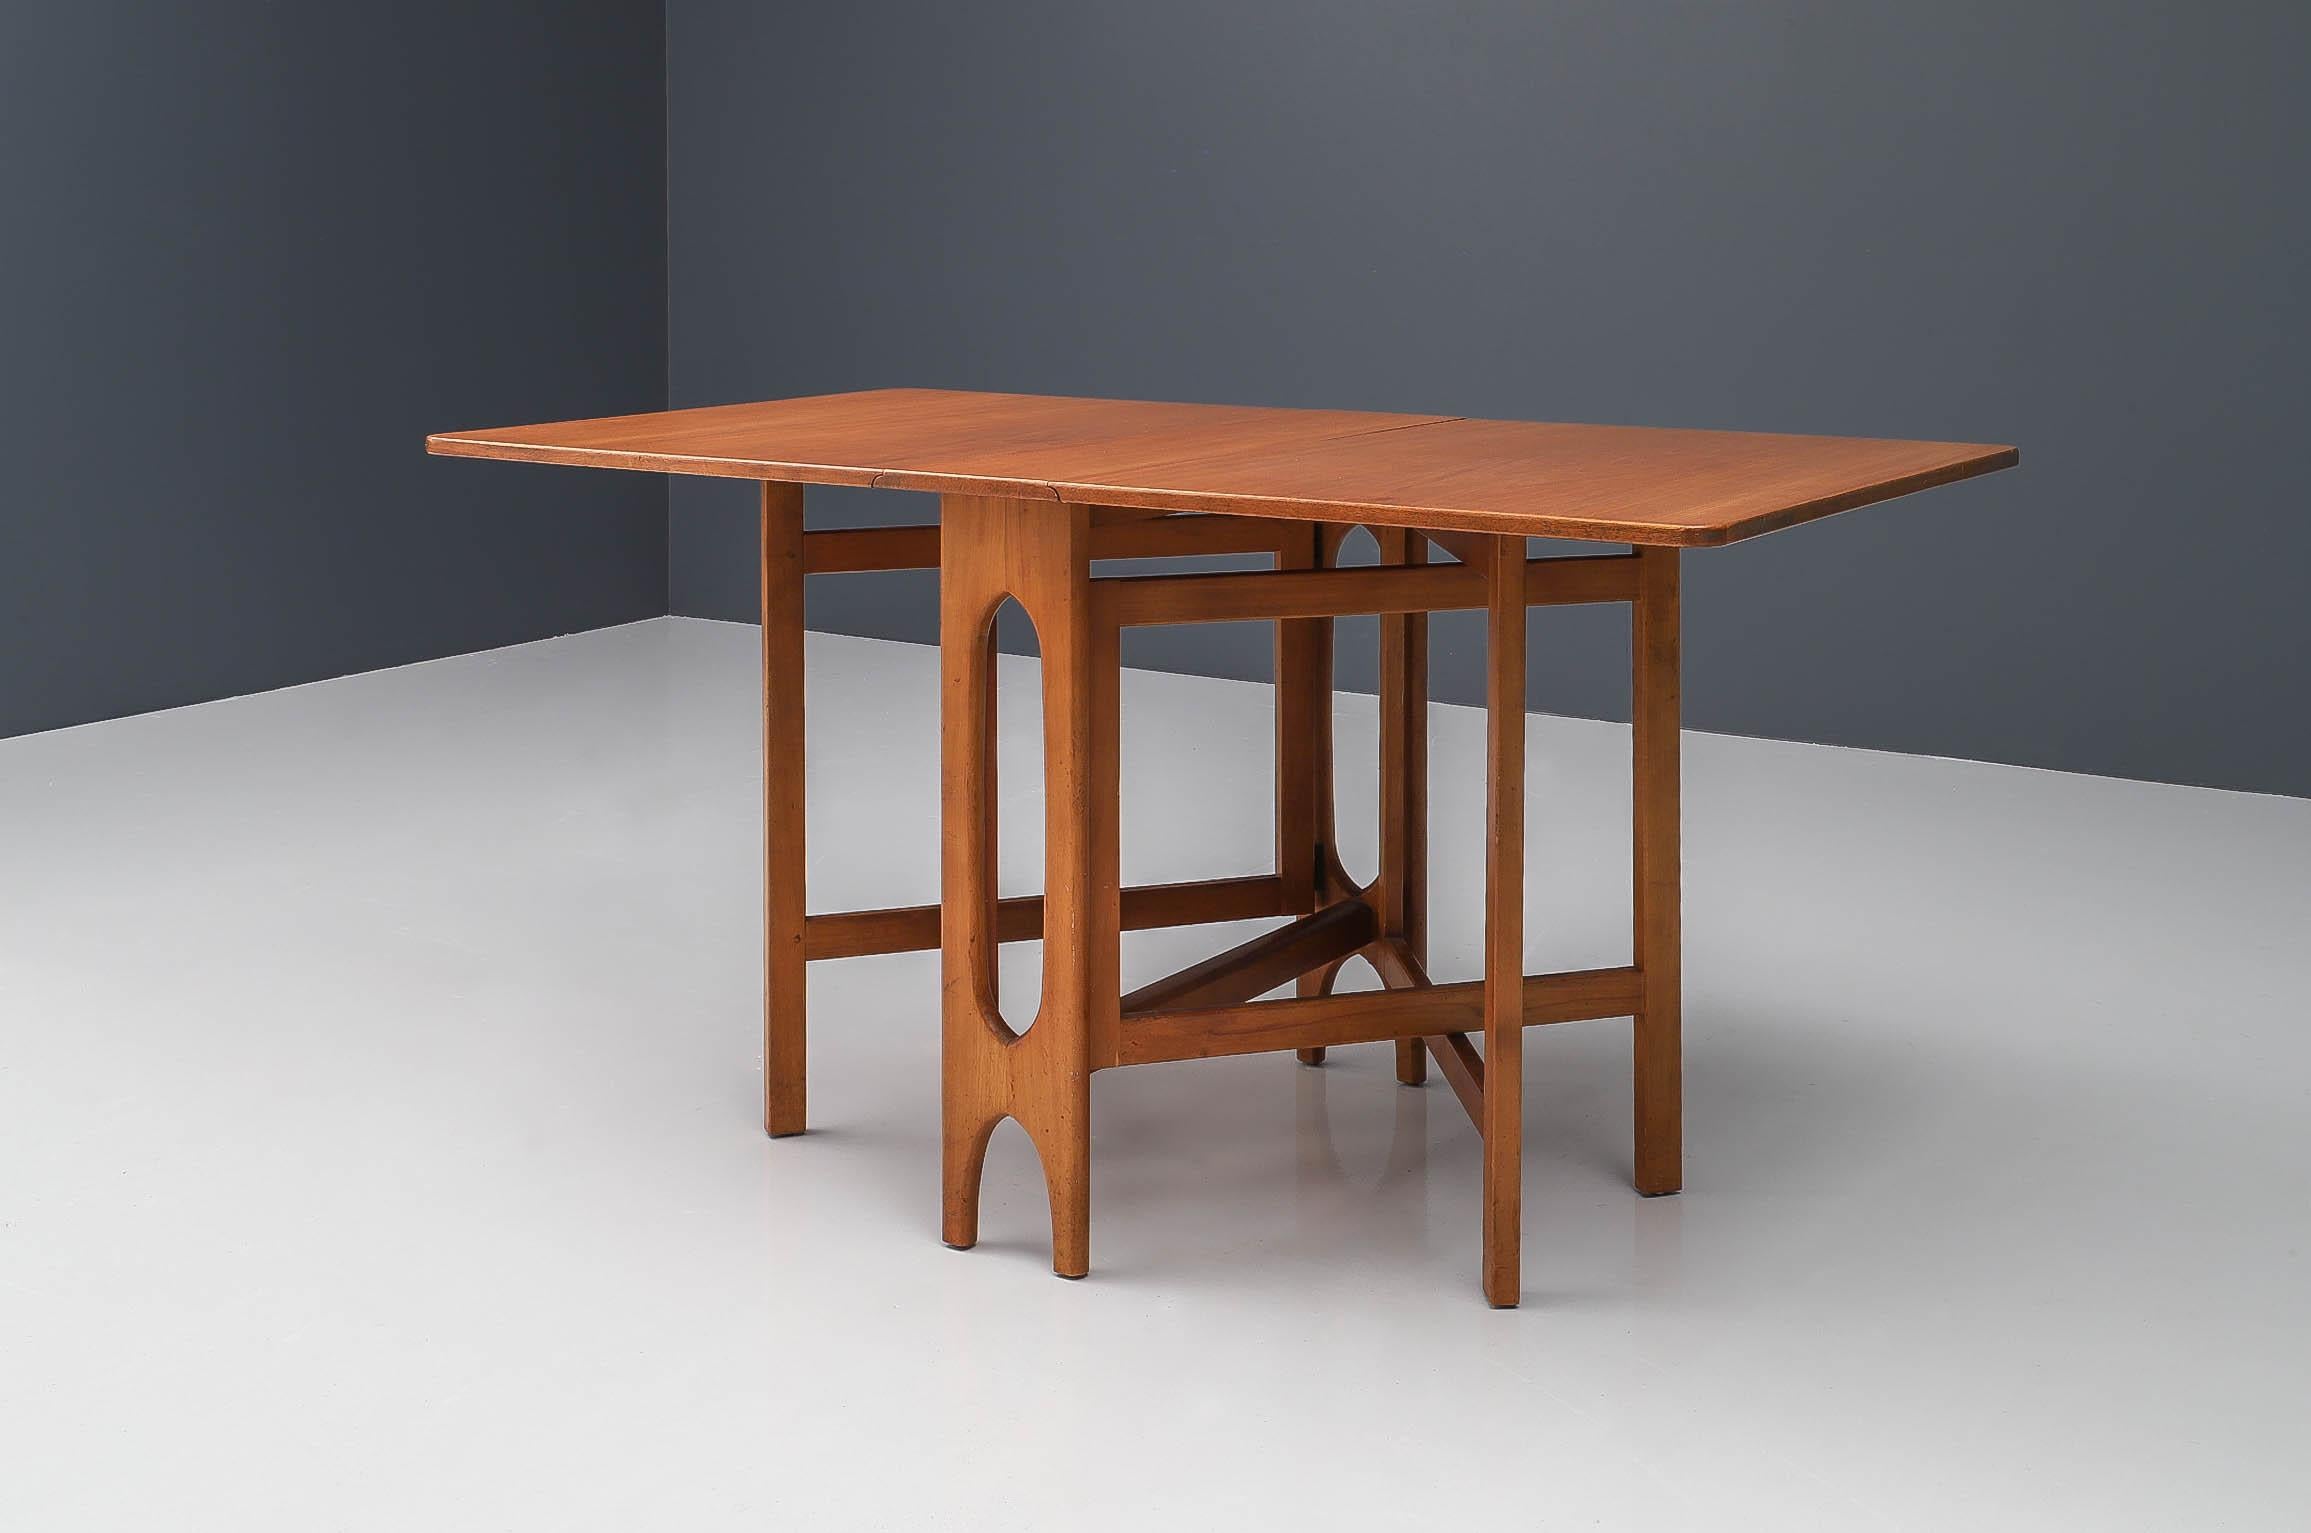 Sculptural Dining Table with Two Drop Leaves in Teak, Denmark, 1960's For Sale 4